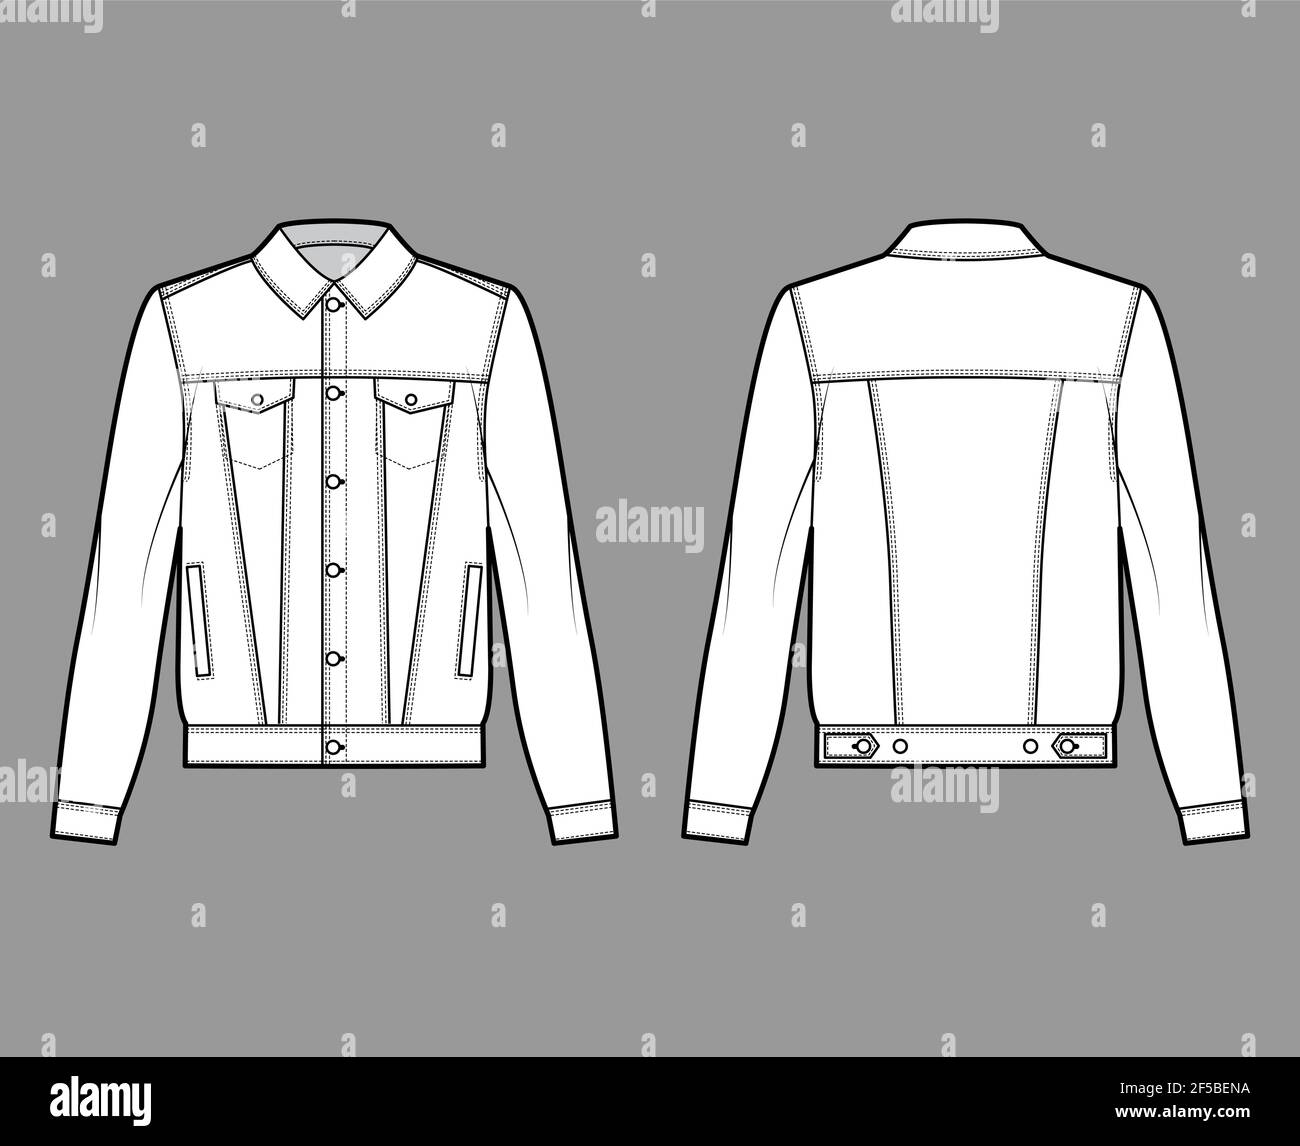 Standard denim jacket technical fashion illustration with oversized body, flap welt pockets, button closure, classic collar. Flat apparel front, back, white color style. Women, men unisex CAD mockup Stock Vector